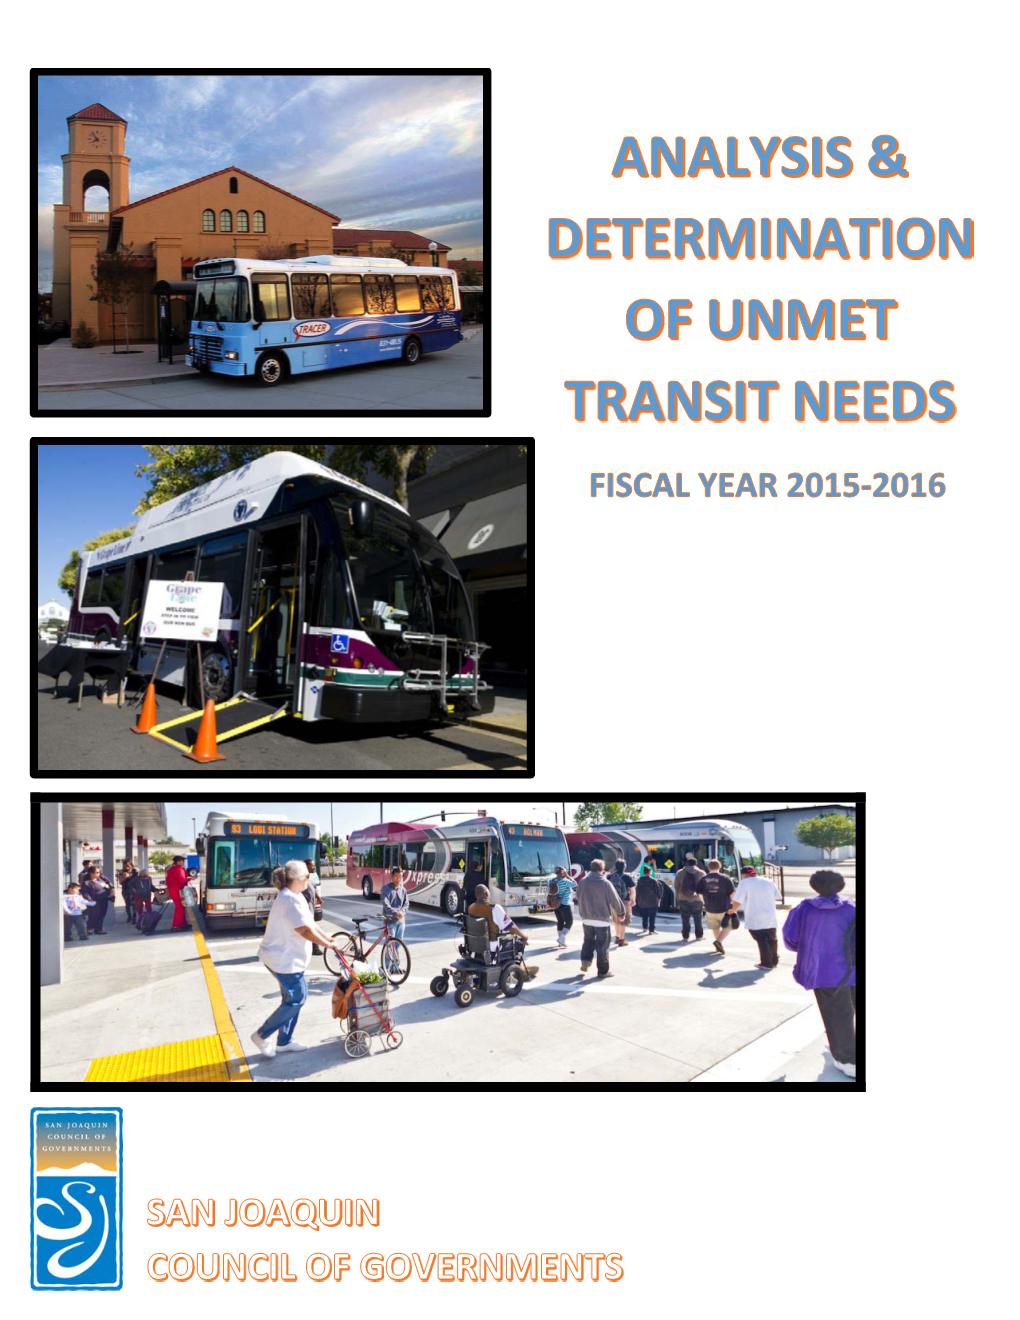 Analysis and Determination of Unmet Transit Needs for Fiscal Year 2015-2016